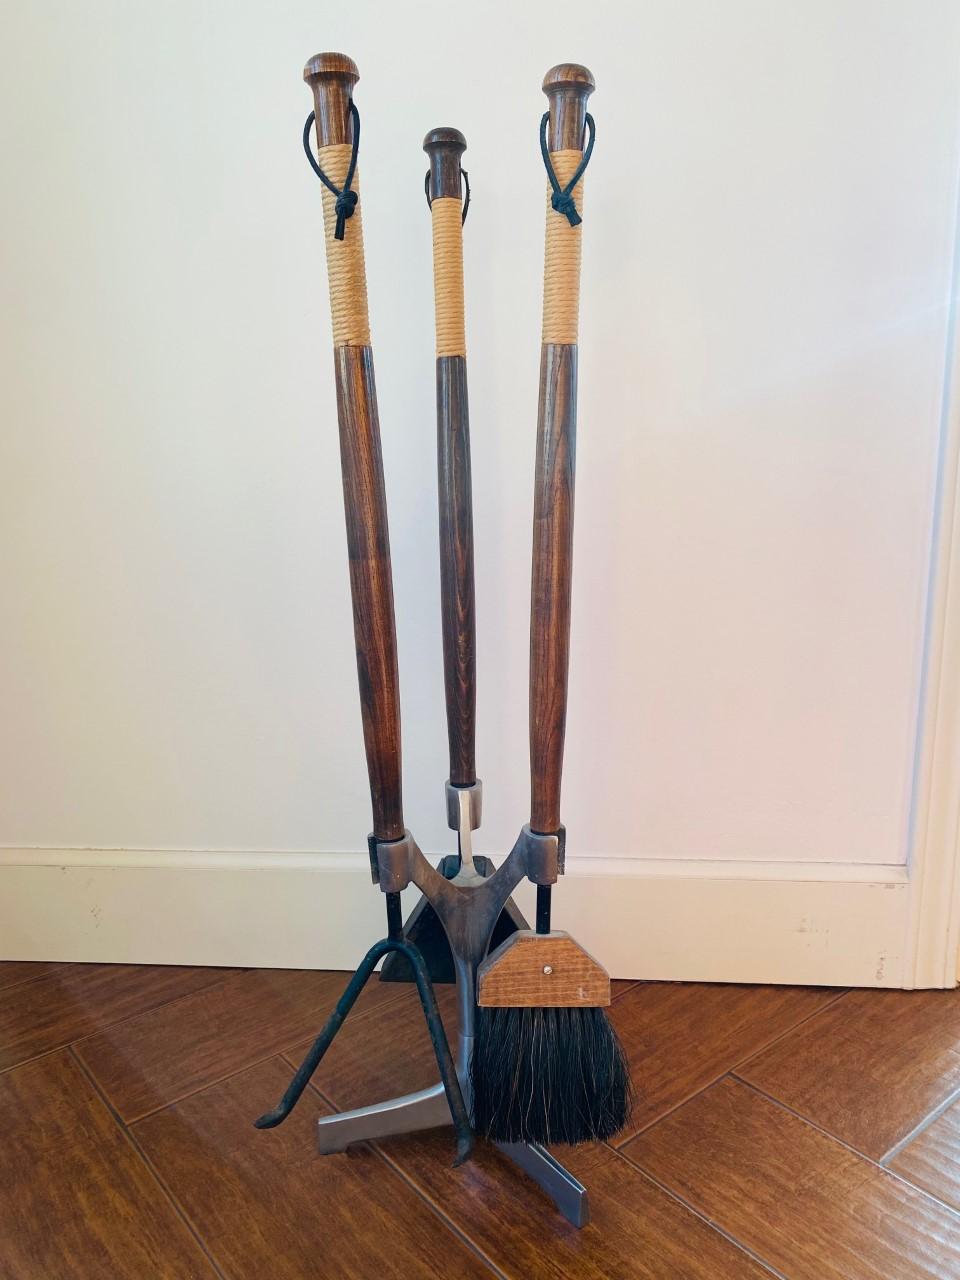 Gorgeous mid-century sculptural fireplace tool set with warm patinated walnut wood, raw iron, and papercord wrapped and leather handle accents. A complement to any fireplace, perfect for minimalist homes. In the style of Mid Century designer, Arthur